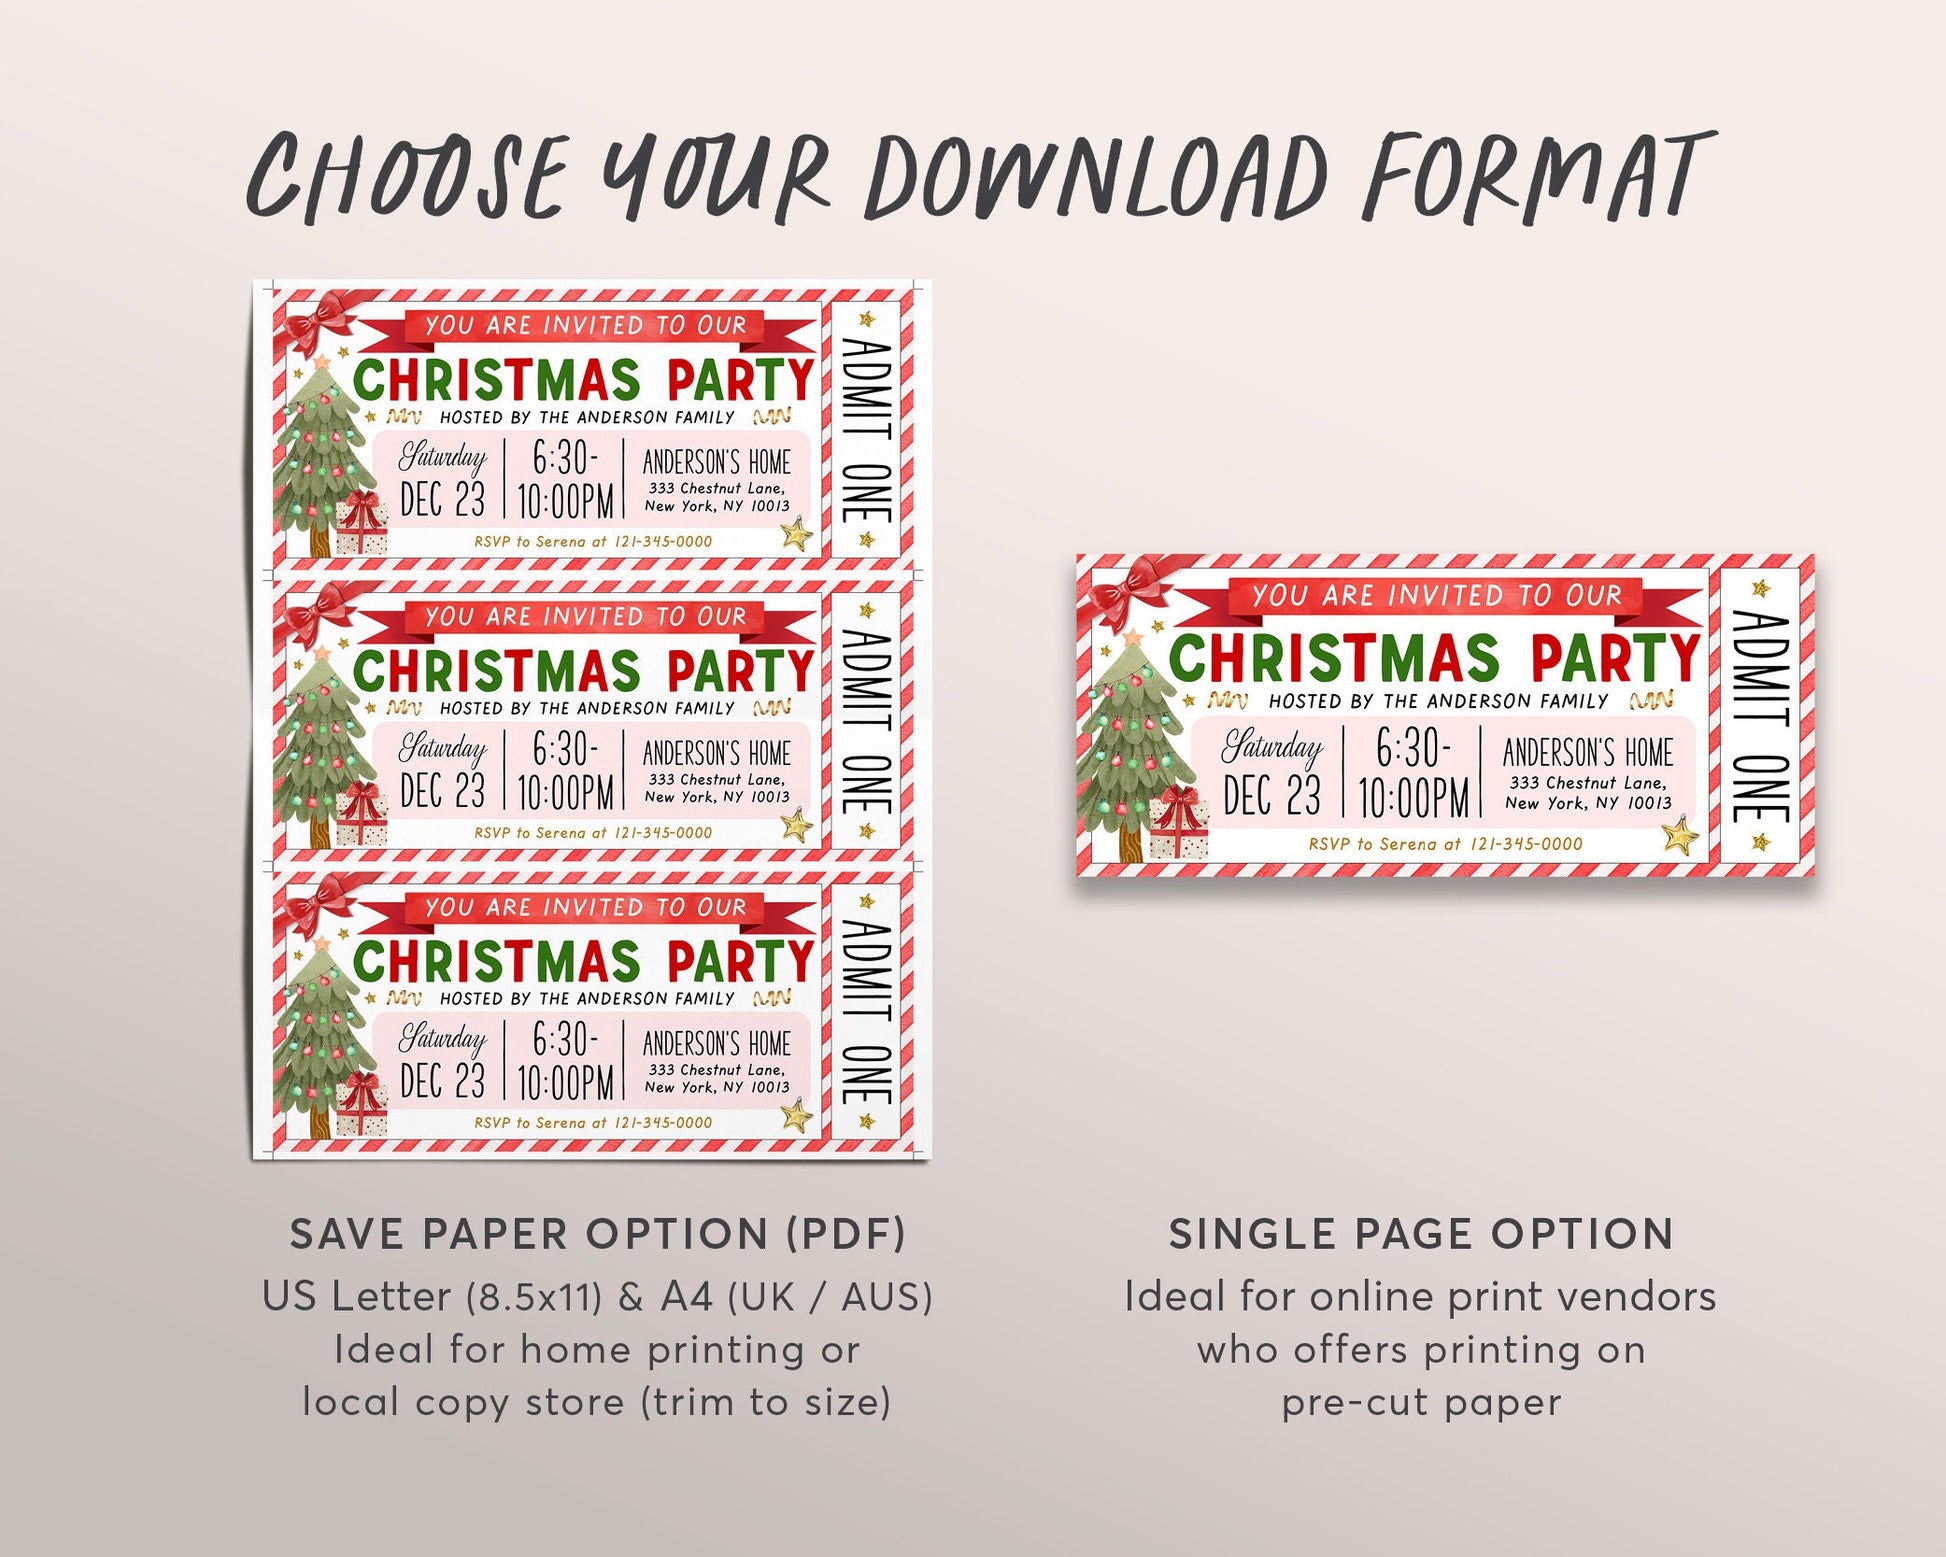 Page 10 - Free and customizable holiday templates